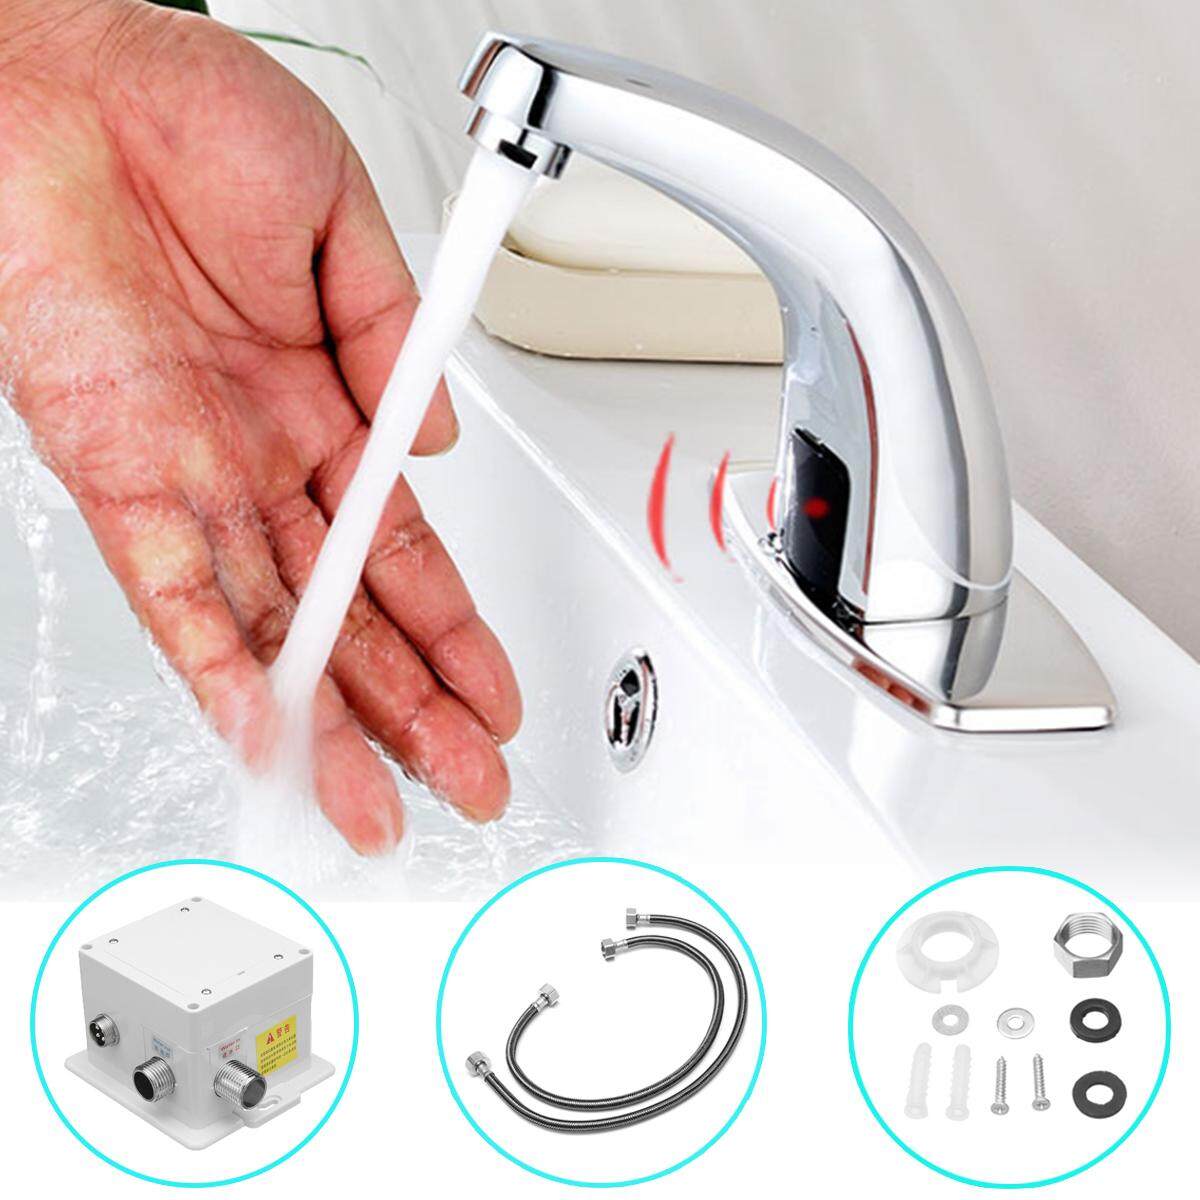 Touchless Automatic Sink Mixers Sensor Tap Hands Free Infrared Water Bathroom Basin Faucet - intl